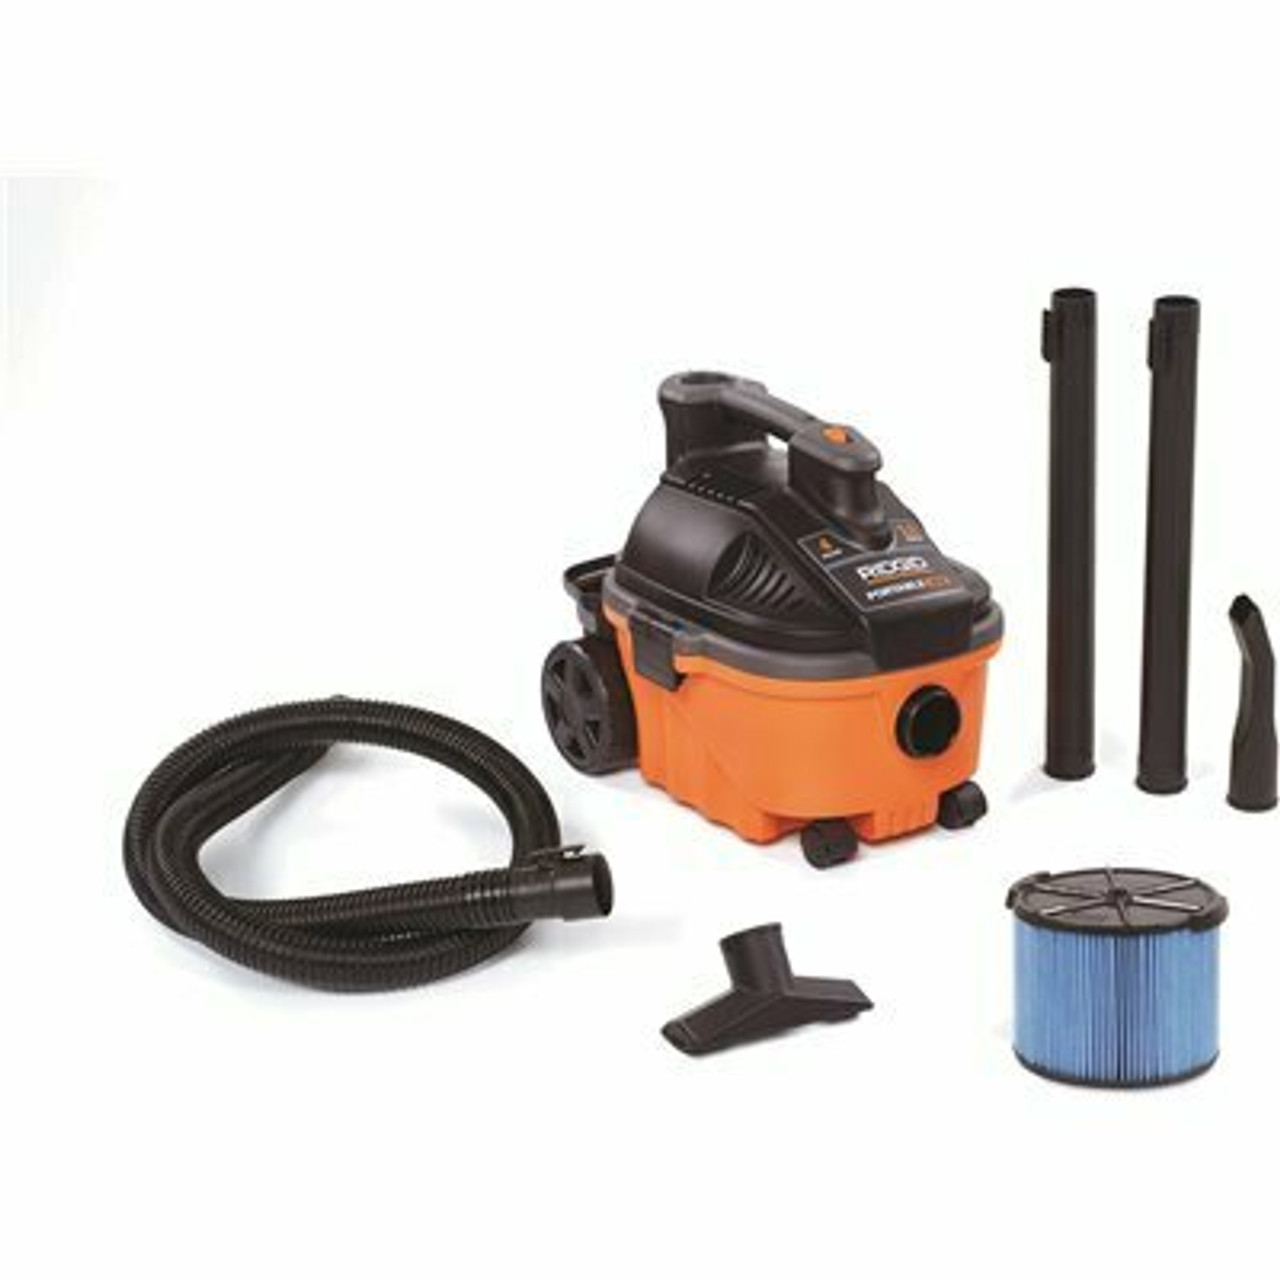 Ridgid 4 Gallon 5.0-Peak Hp Portable Wet/Dry Shop Vacuum With Fine Dust Filter, Hose And Accessories